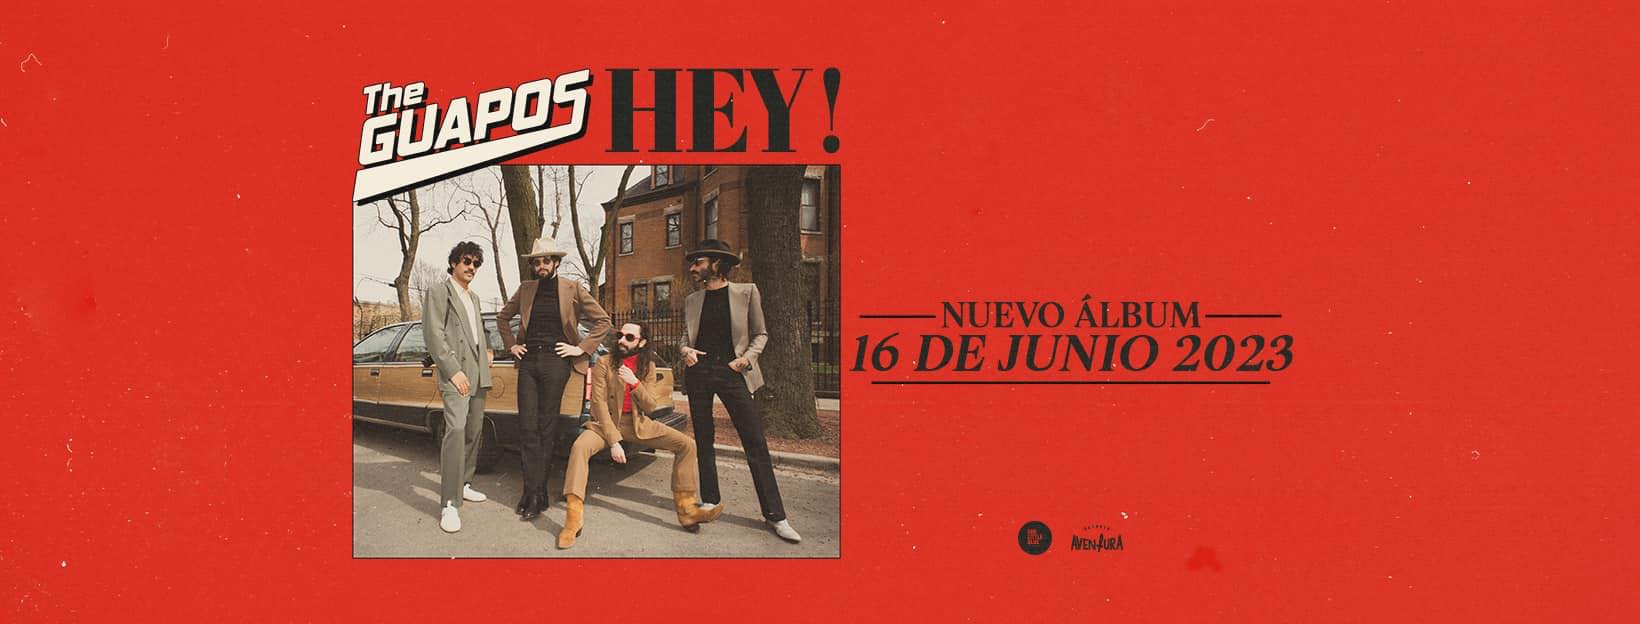 The Guapos - Hey!